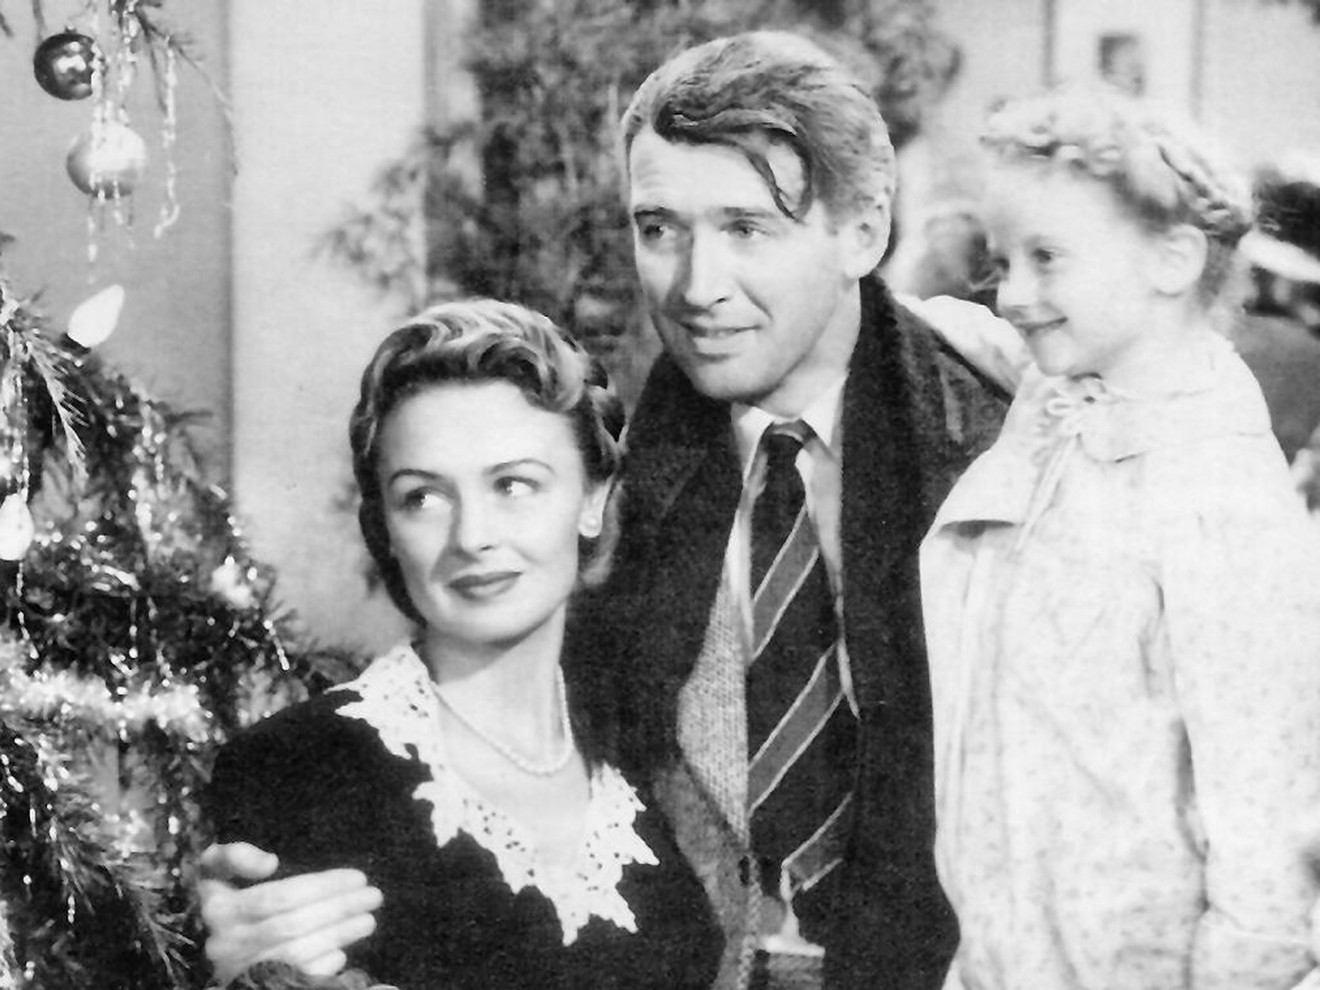 We cry every damn time. See It's a Wonderful Life at the Majestic Theatre on Thursday, for just 10 bucks.